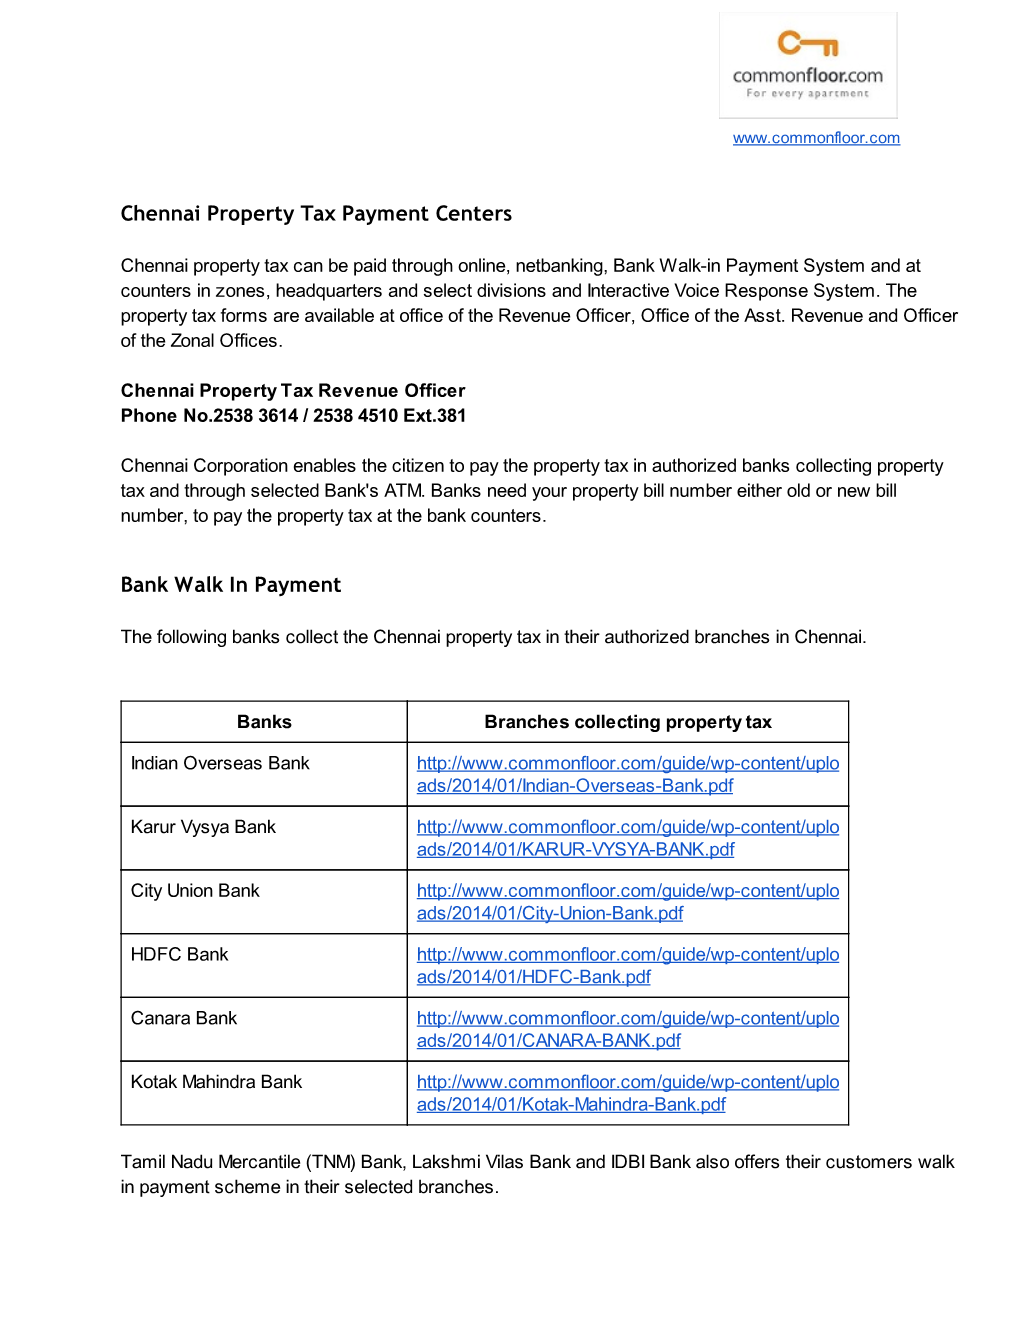 Chennai Property Tax Payment Centers Bank Walk in Payment